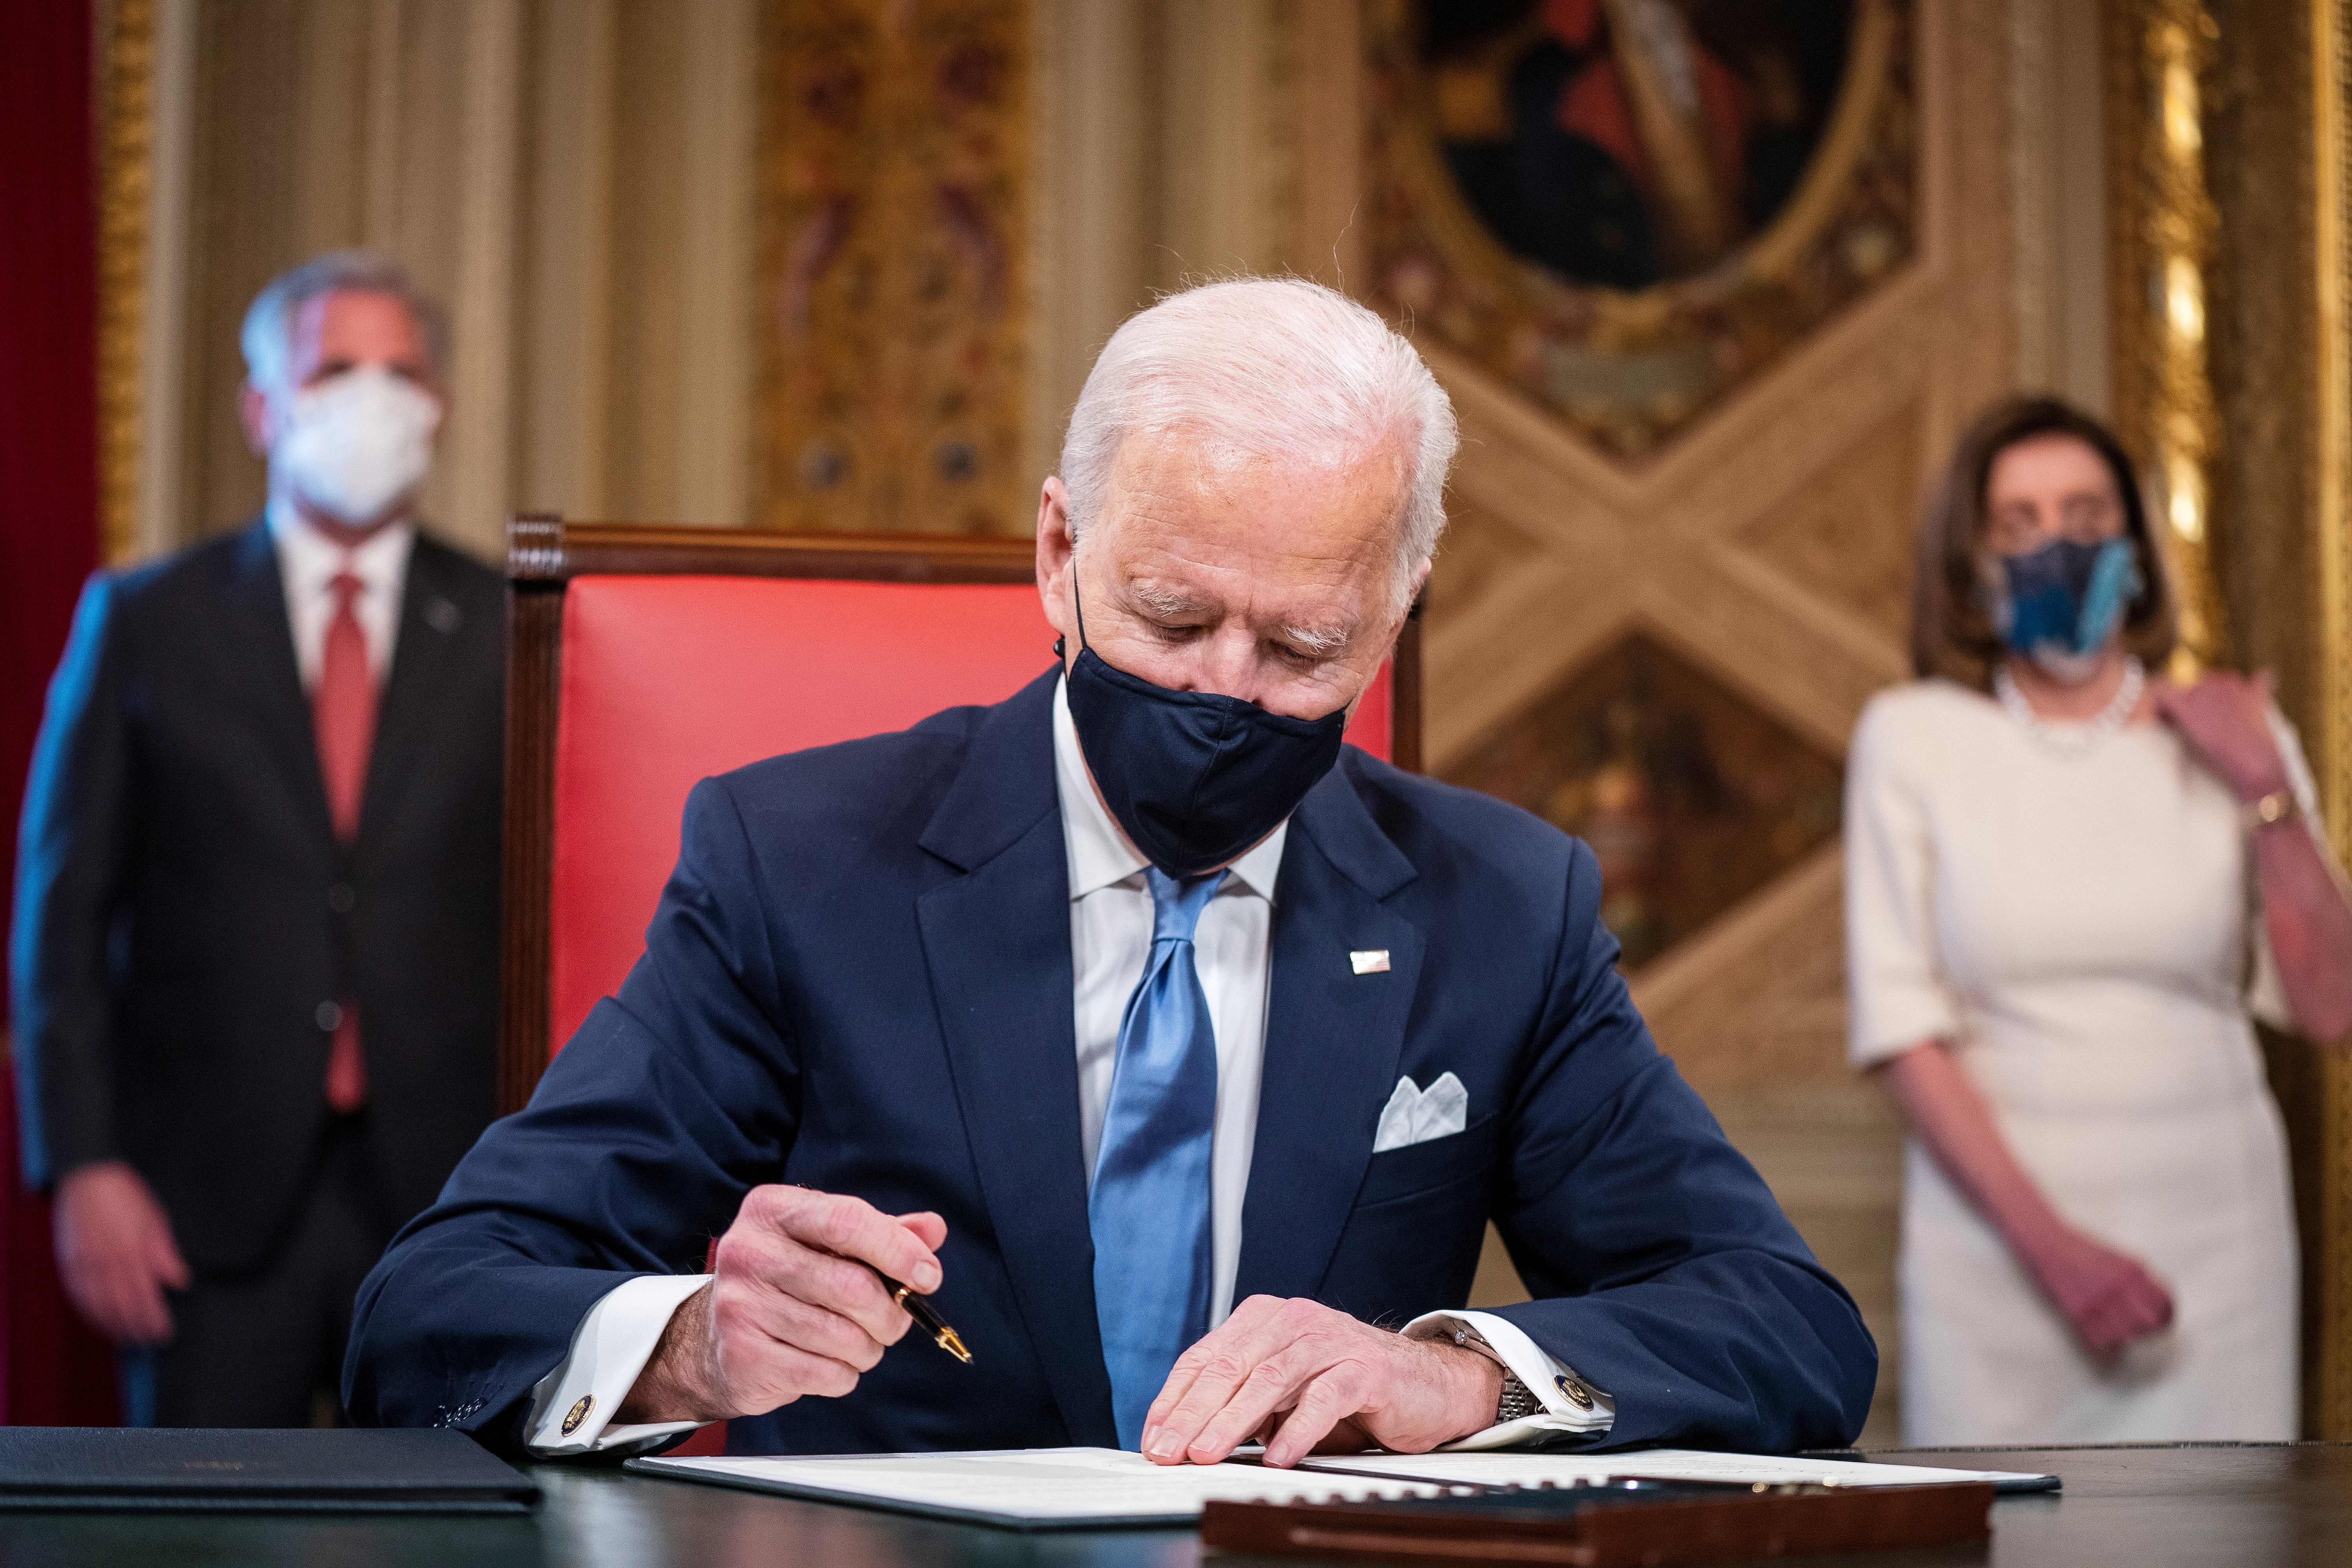 Biden in a mask signing a document 
